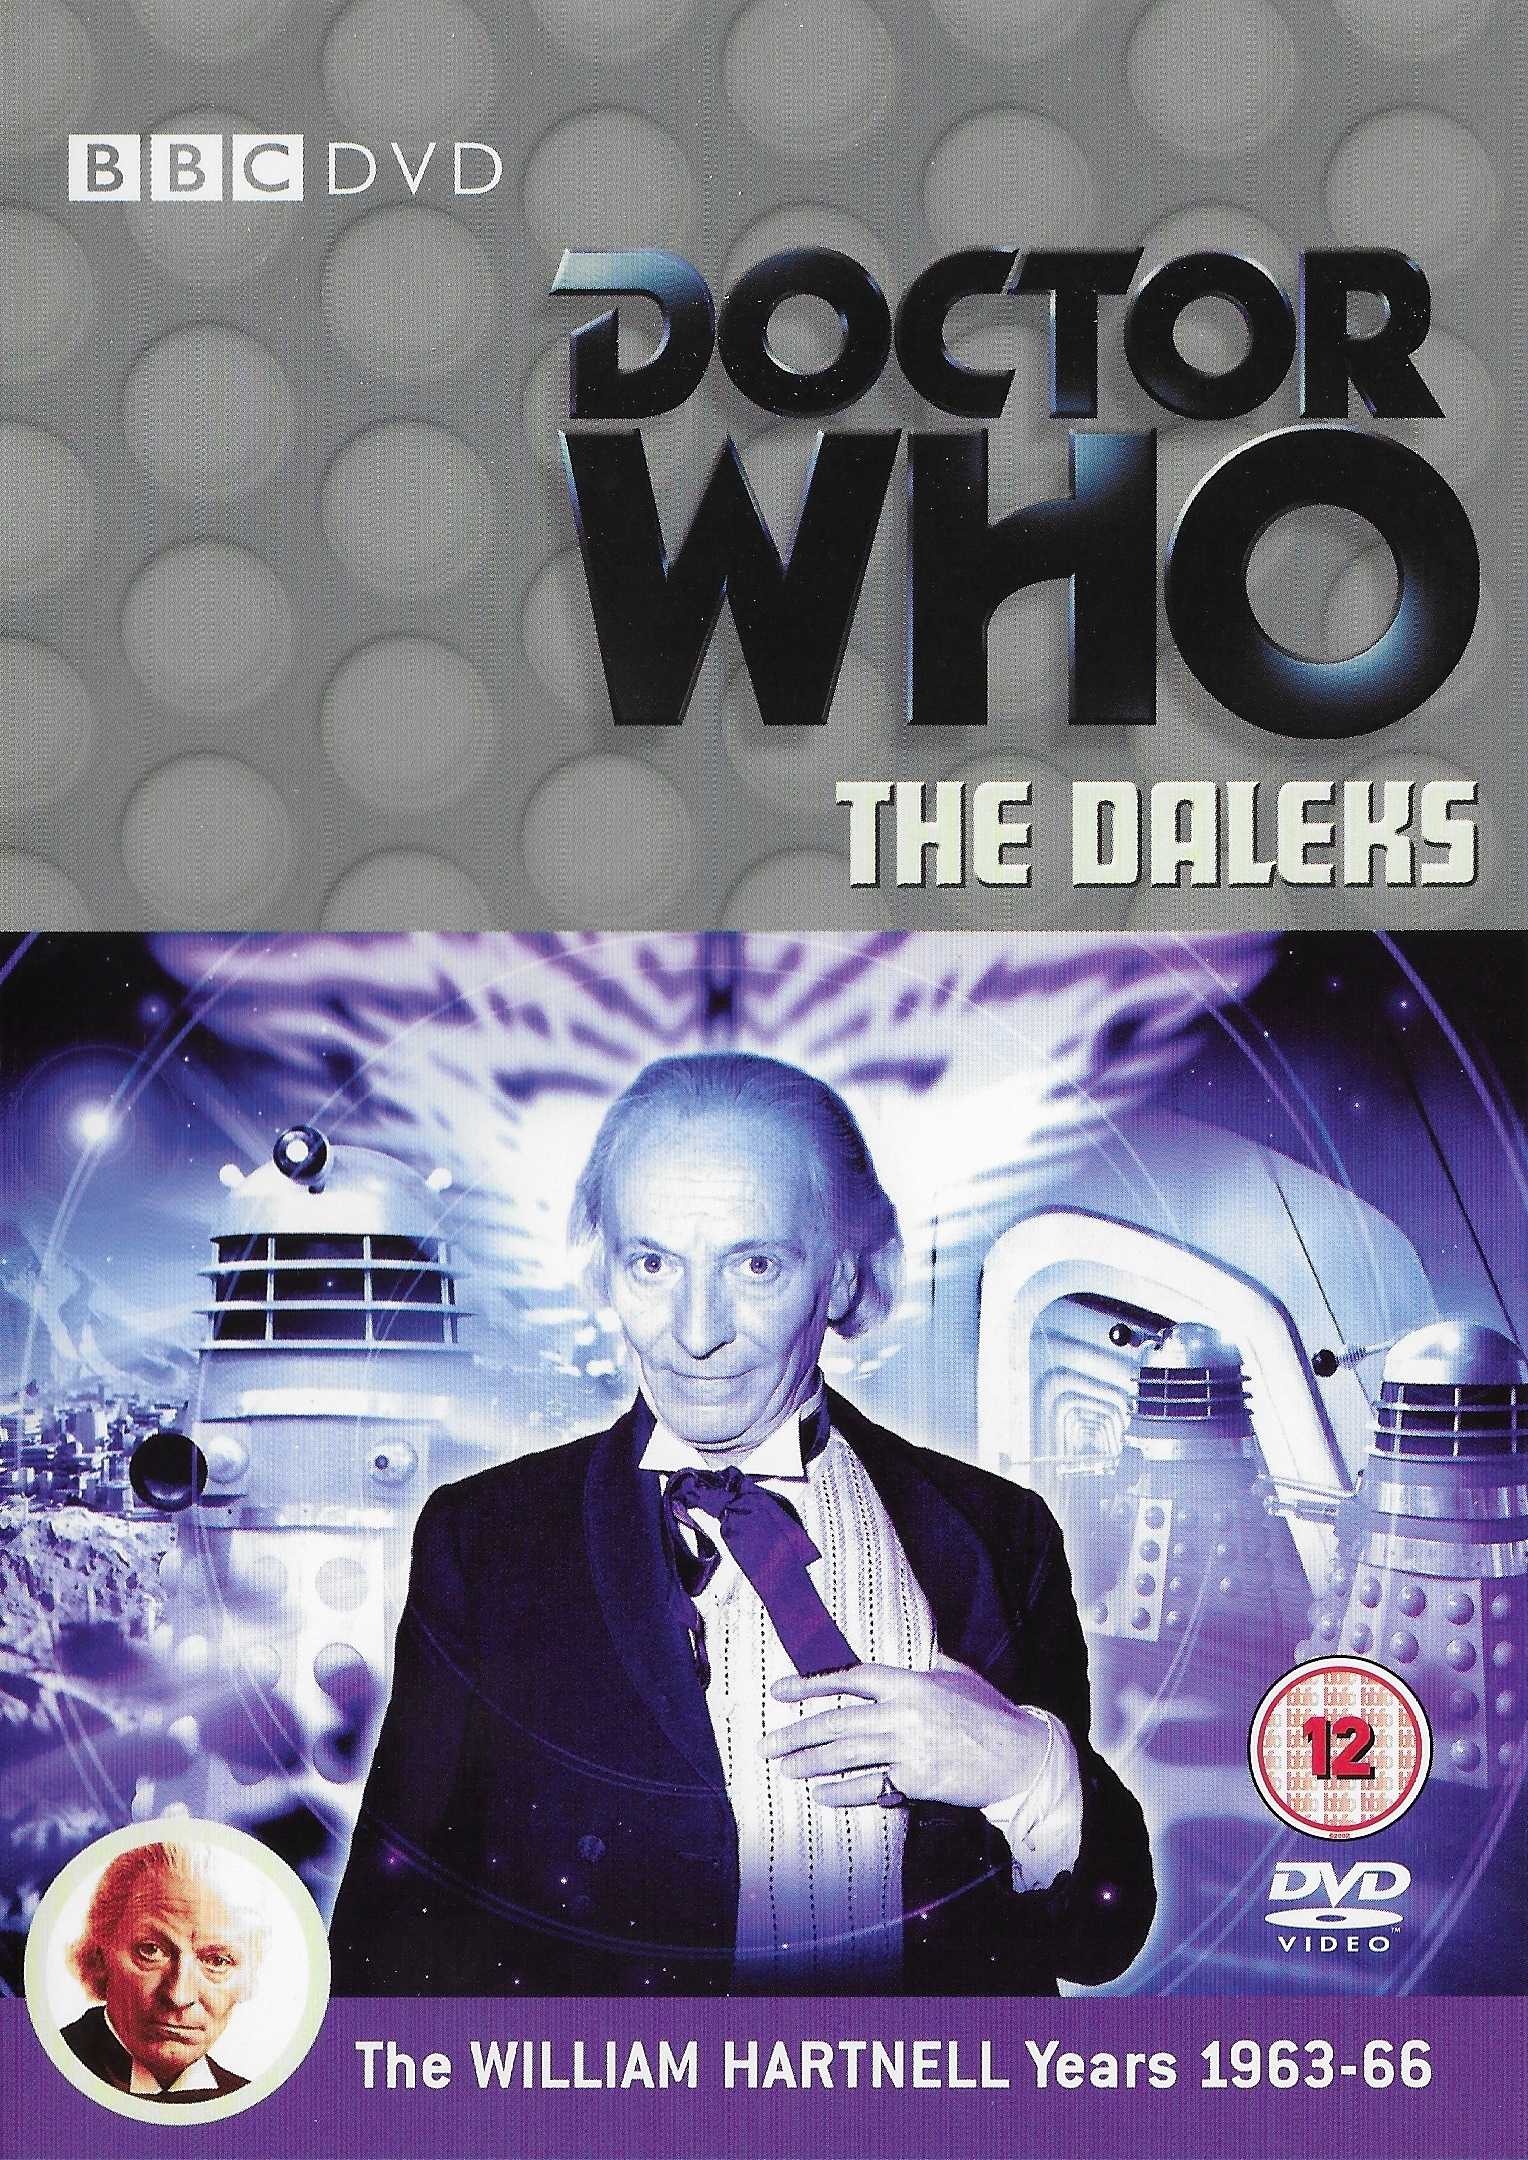 Picture of BBCDVD 1882B Doctor Who - The Daleks by artist Terry Nation from the BBC records and Tapes library